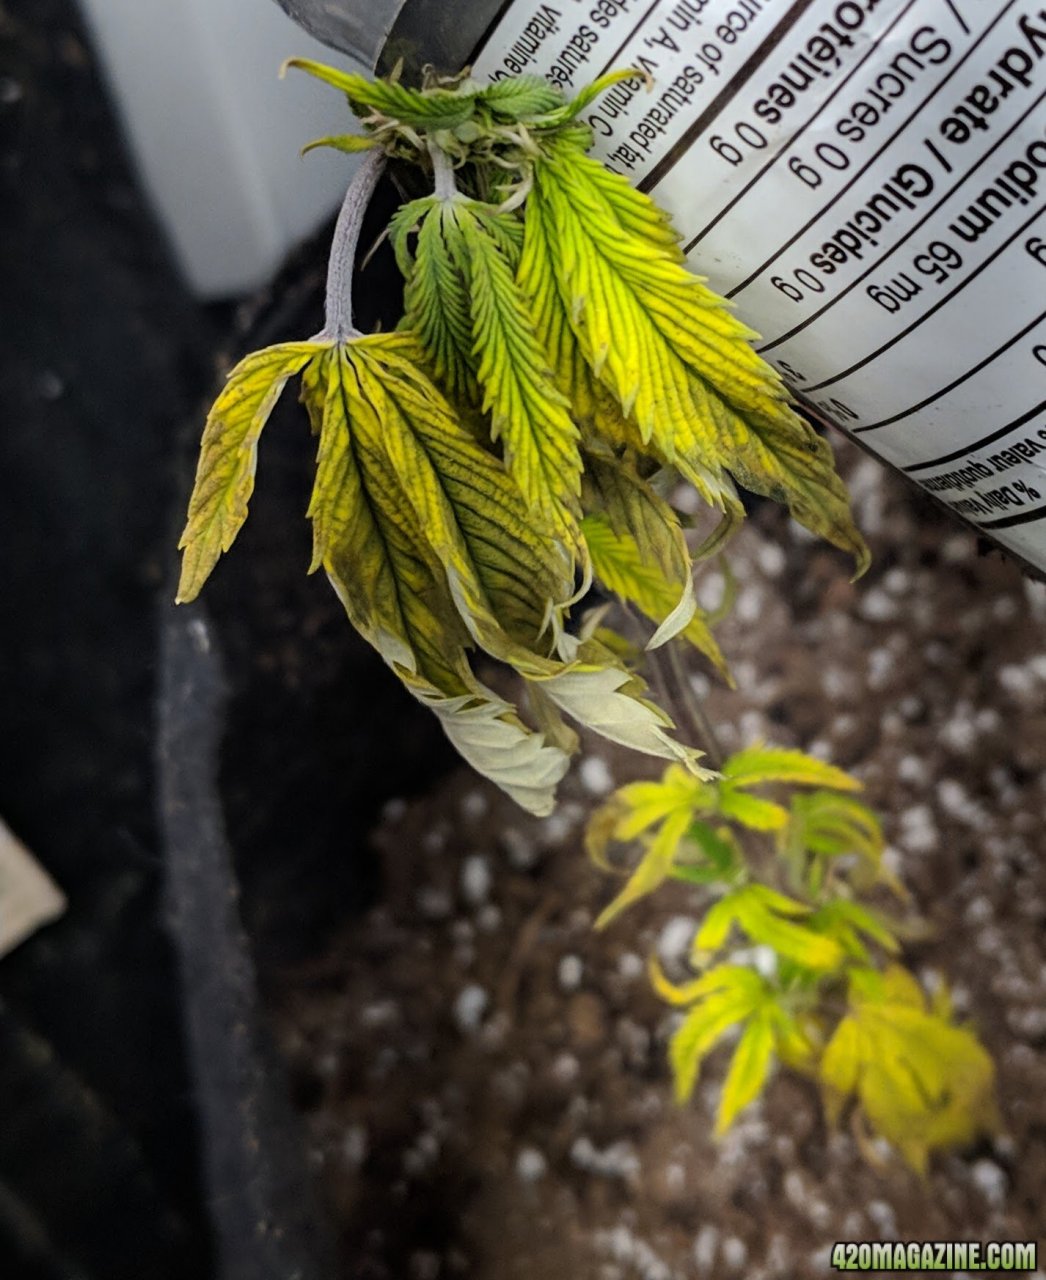 Dying clones 07/03/18